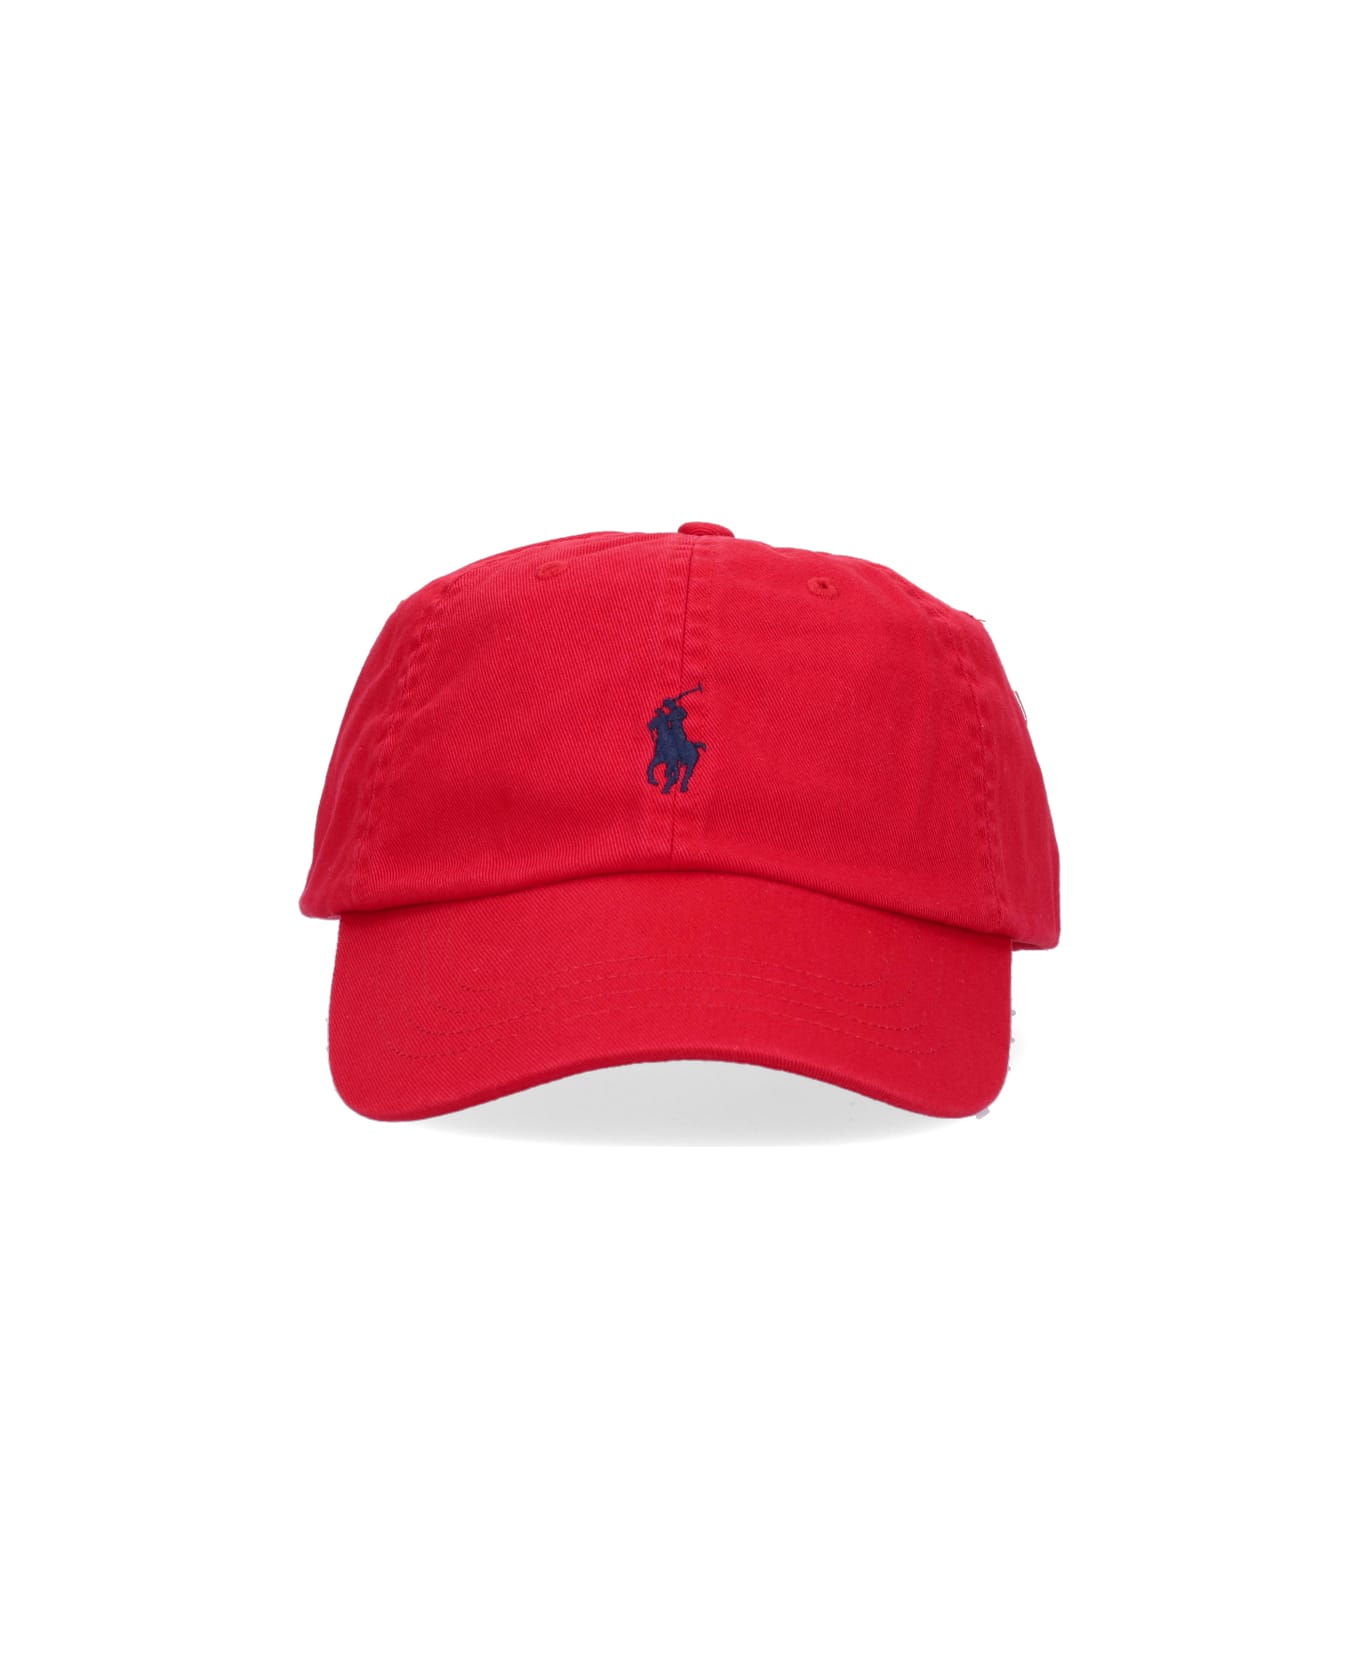 Polo Ralph Lauren Red Baseball Hat With Blue Pony - Red